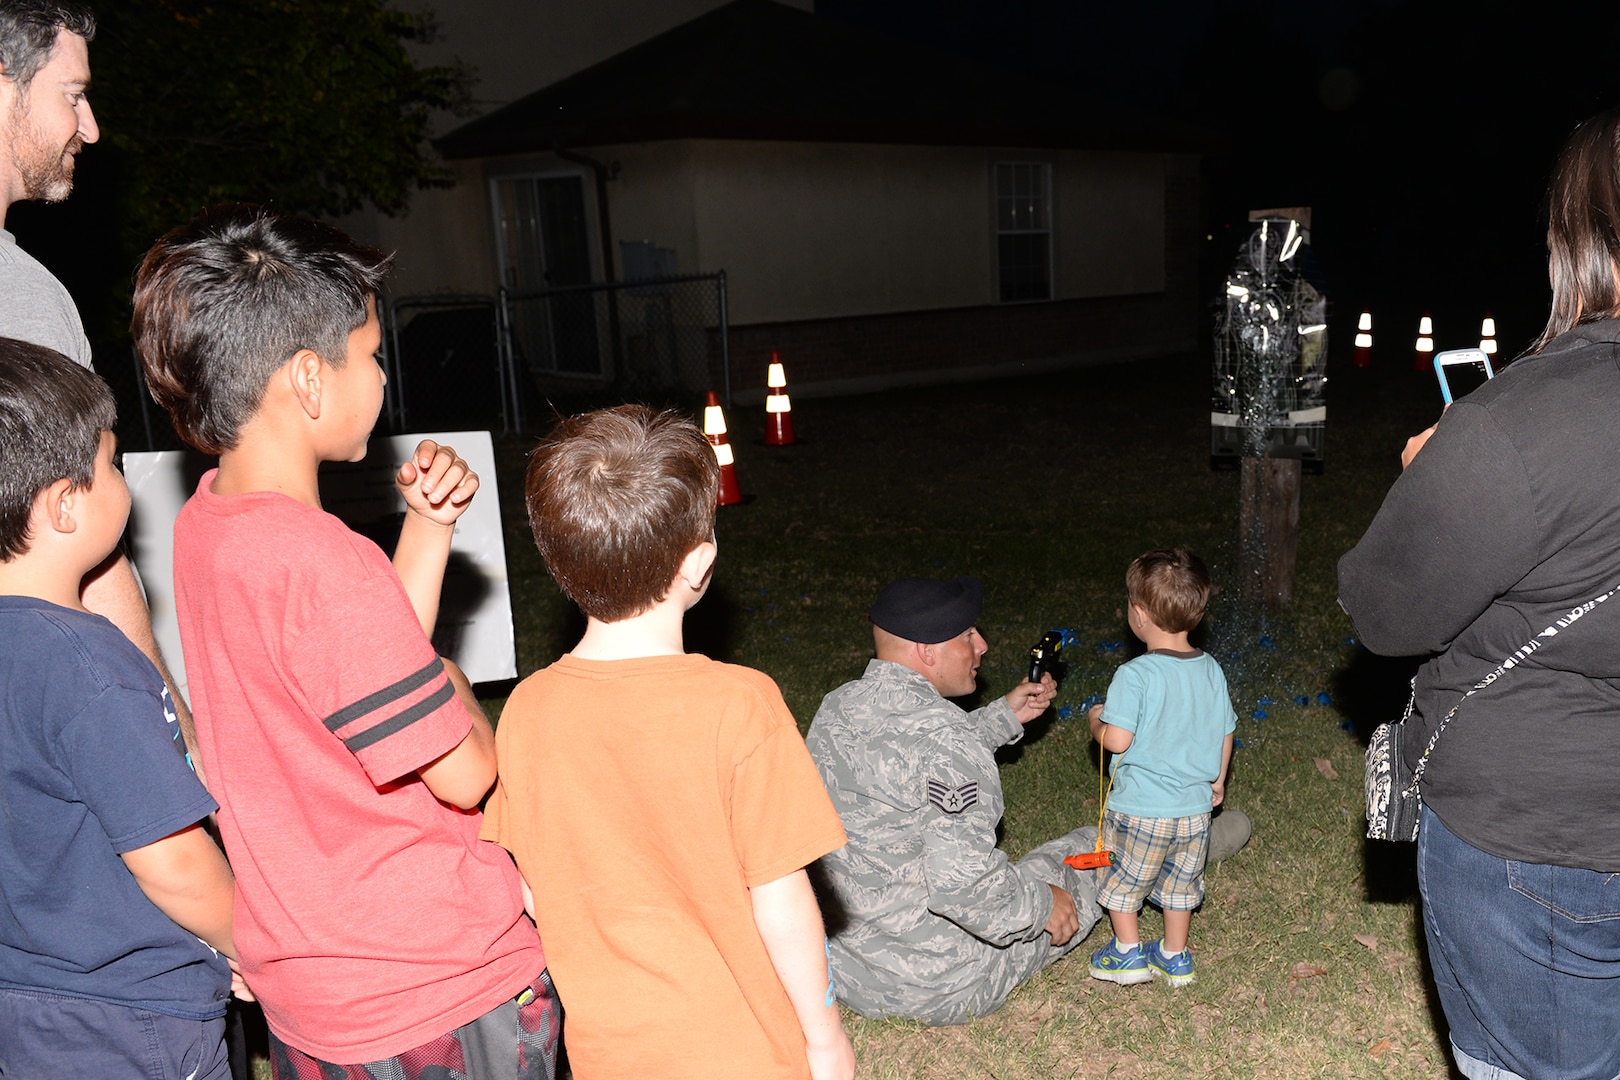 Staff Sgt. Scott Aberle, 802nd Security Forces Squadron training instructor, assists children in safely using a Taser to shoot a target during National Night Out Oct. 6, 2015, at Joint Base San Antonio-Lackland, Texas. The one of the purposes of the annual event is to enhance relations between the police and community, and increase neighborhood camaraderie. (U.S. Air Force photo by Senior Airman Krystal Wright/Released)